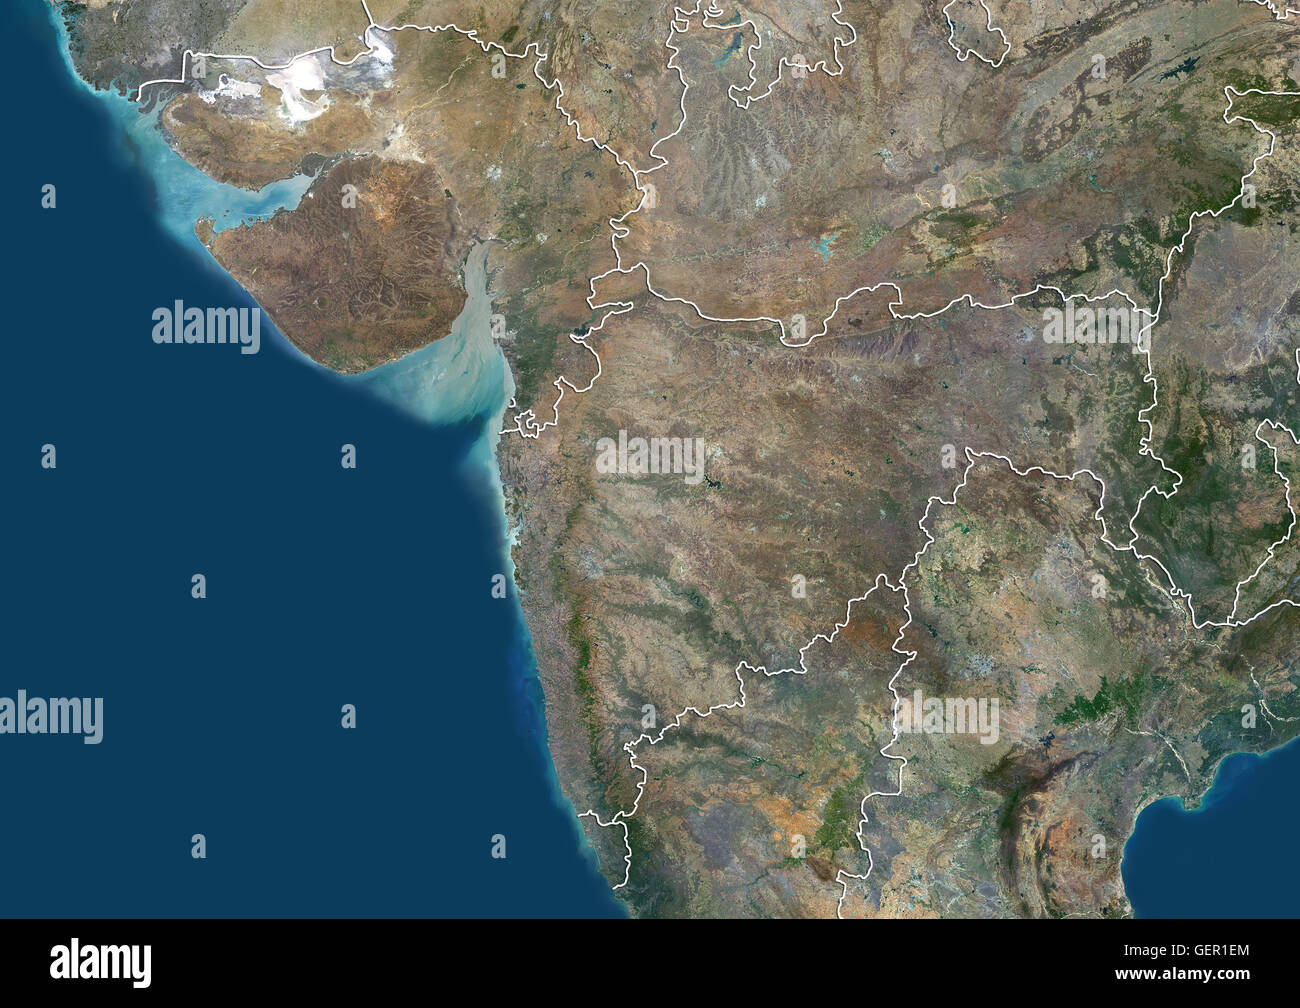 Satellite view of Western India (with administrative boundaries). It covers the states of Goa, Gujarat and Maharashtra. This image was compiled from data acquired by Landsat 8 satellite in 2014. Stock Photo